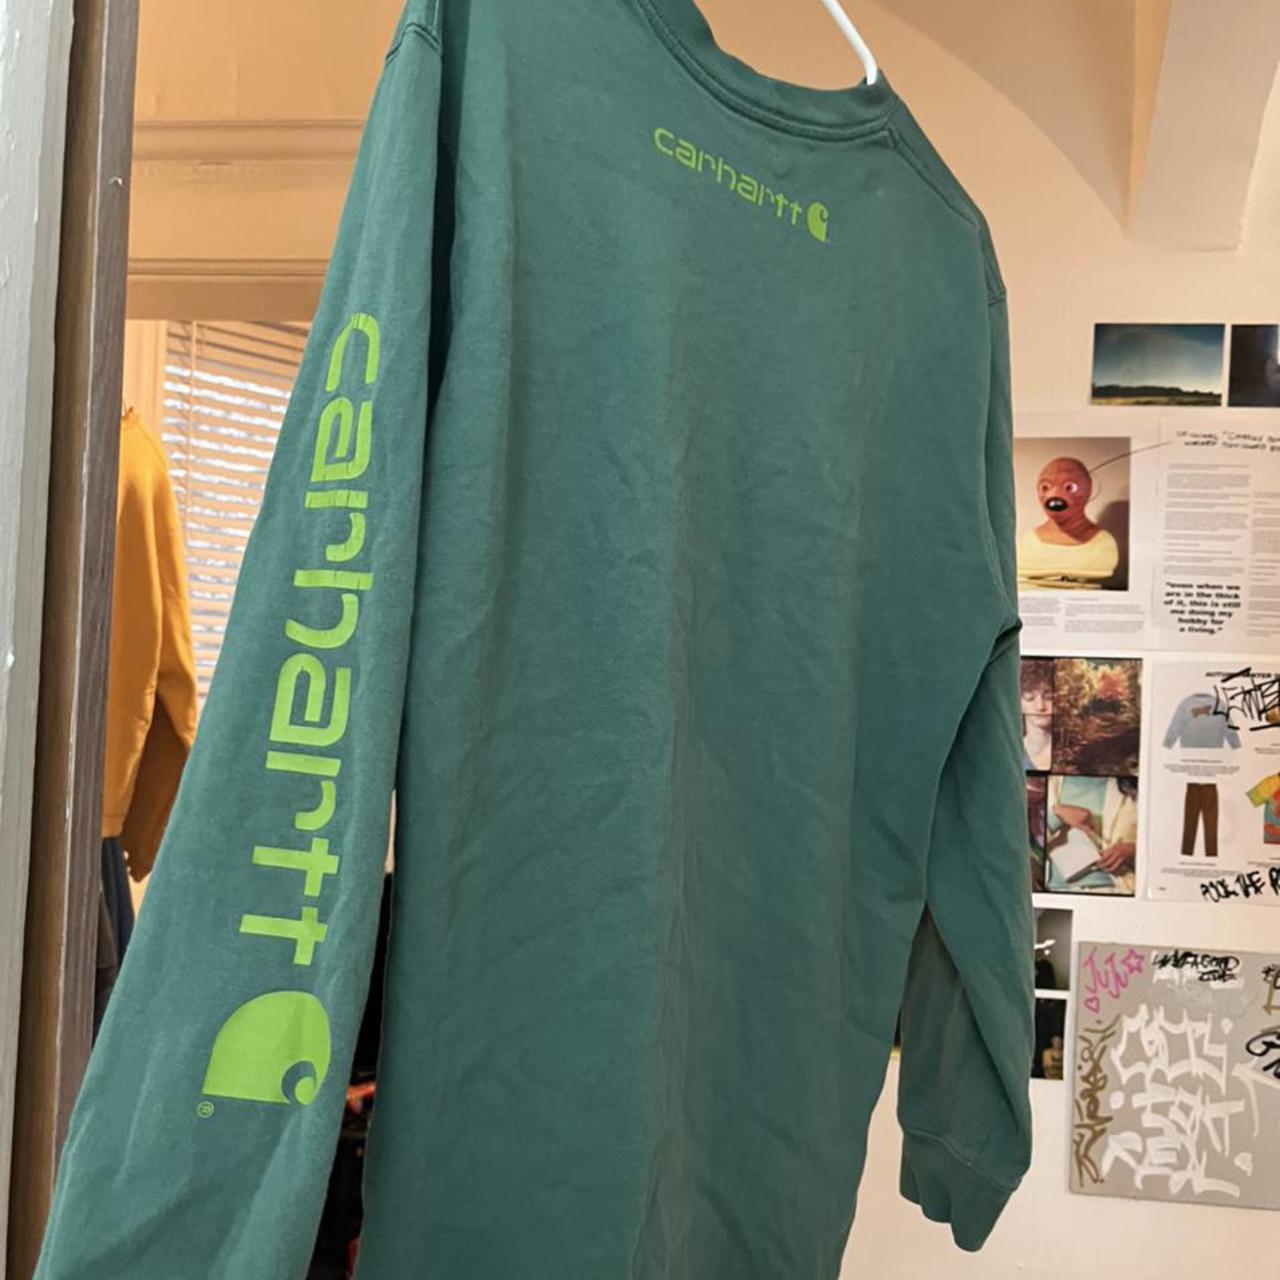 Product Image 1 - Green Carhartt Long-sleeve

Condition: 8/10

Fits like